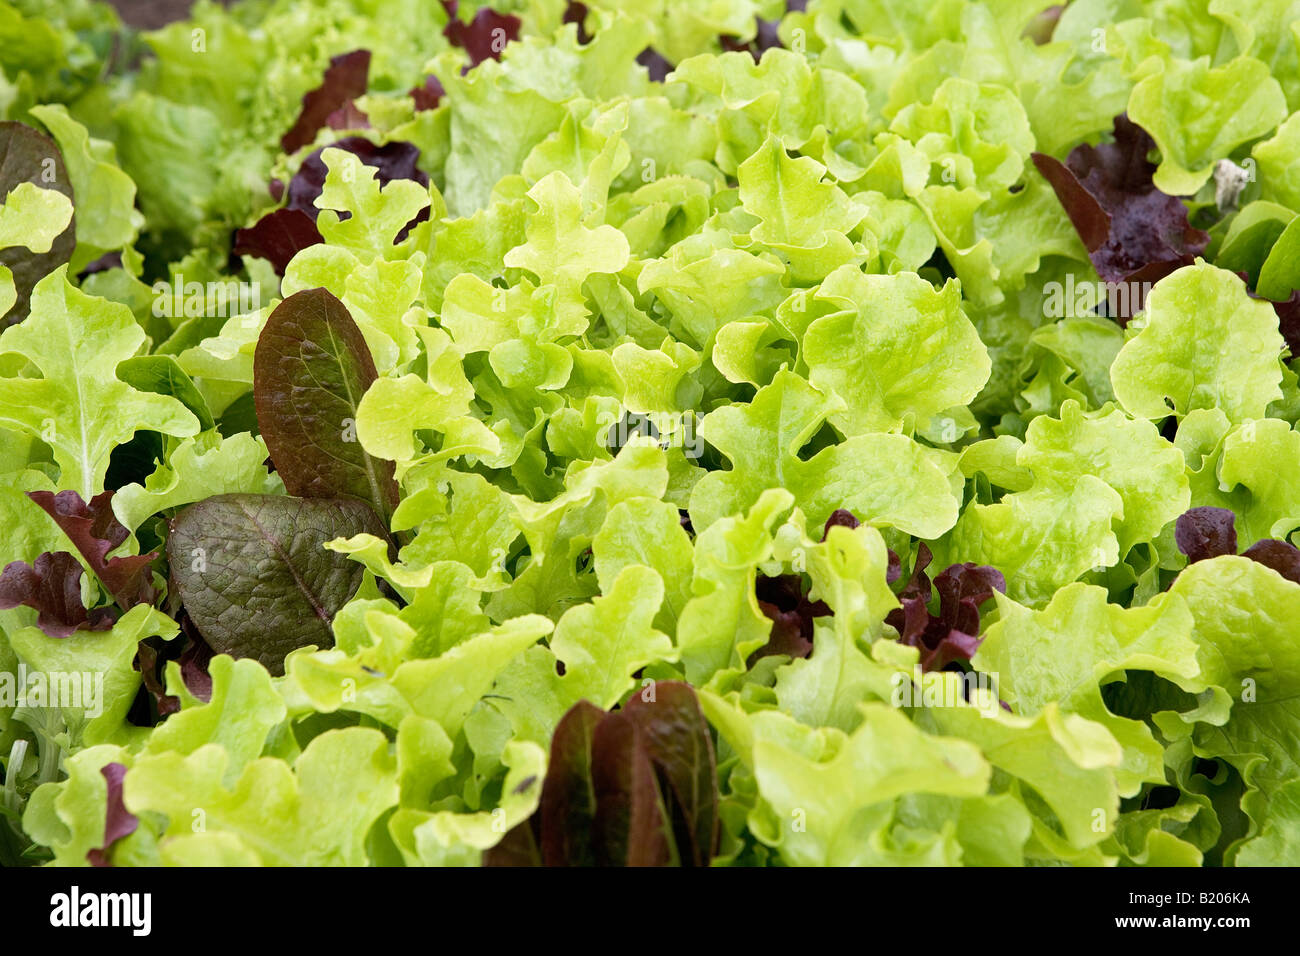 Salad leaves are easy to grow in pots or the garden. They provide healthy nutrients, vitamins and minerals, adding texture. Stock Photo